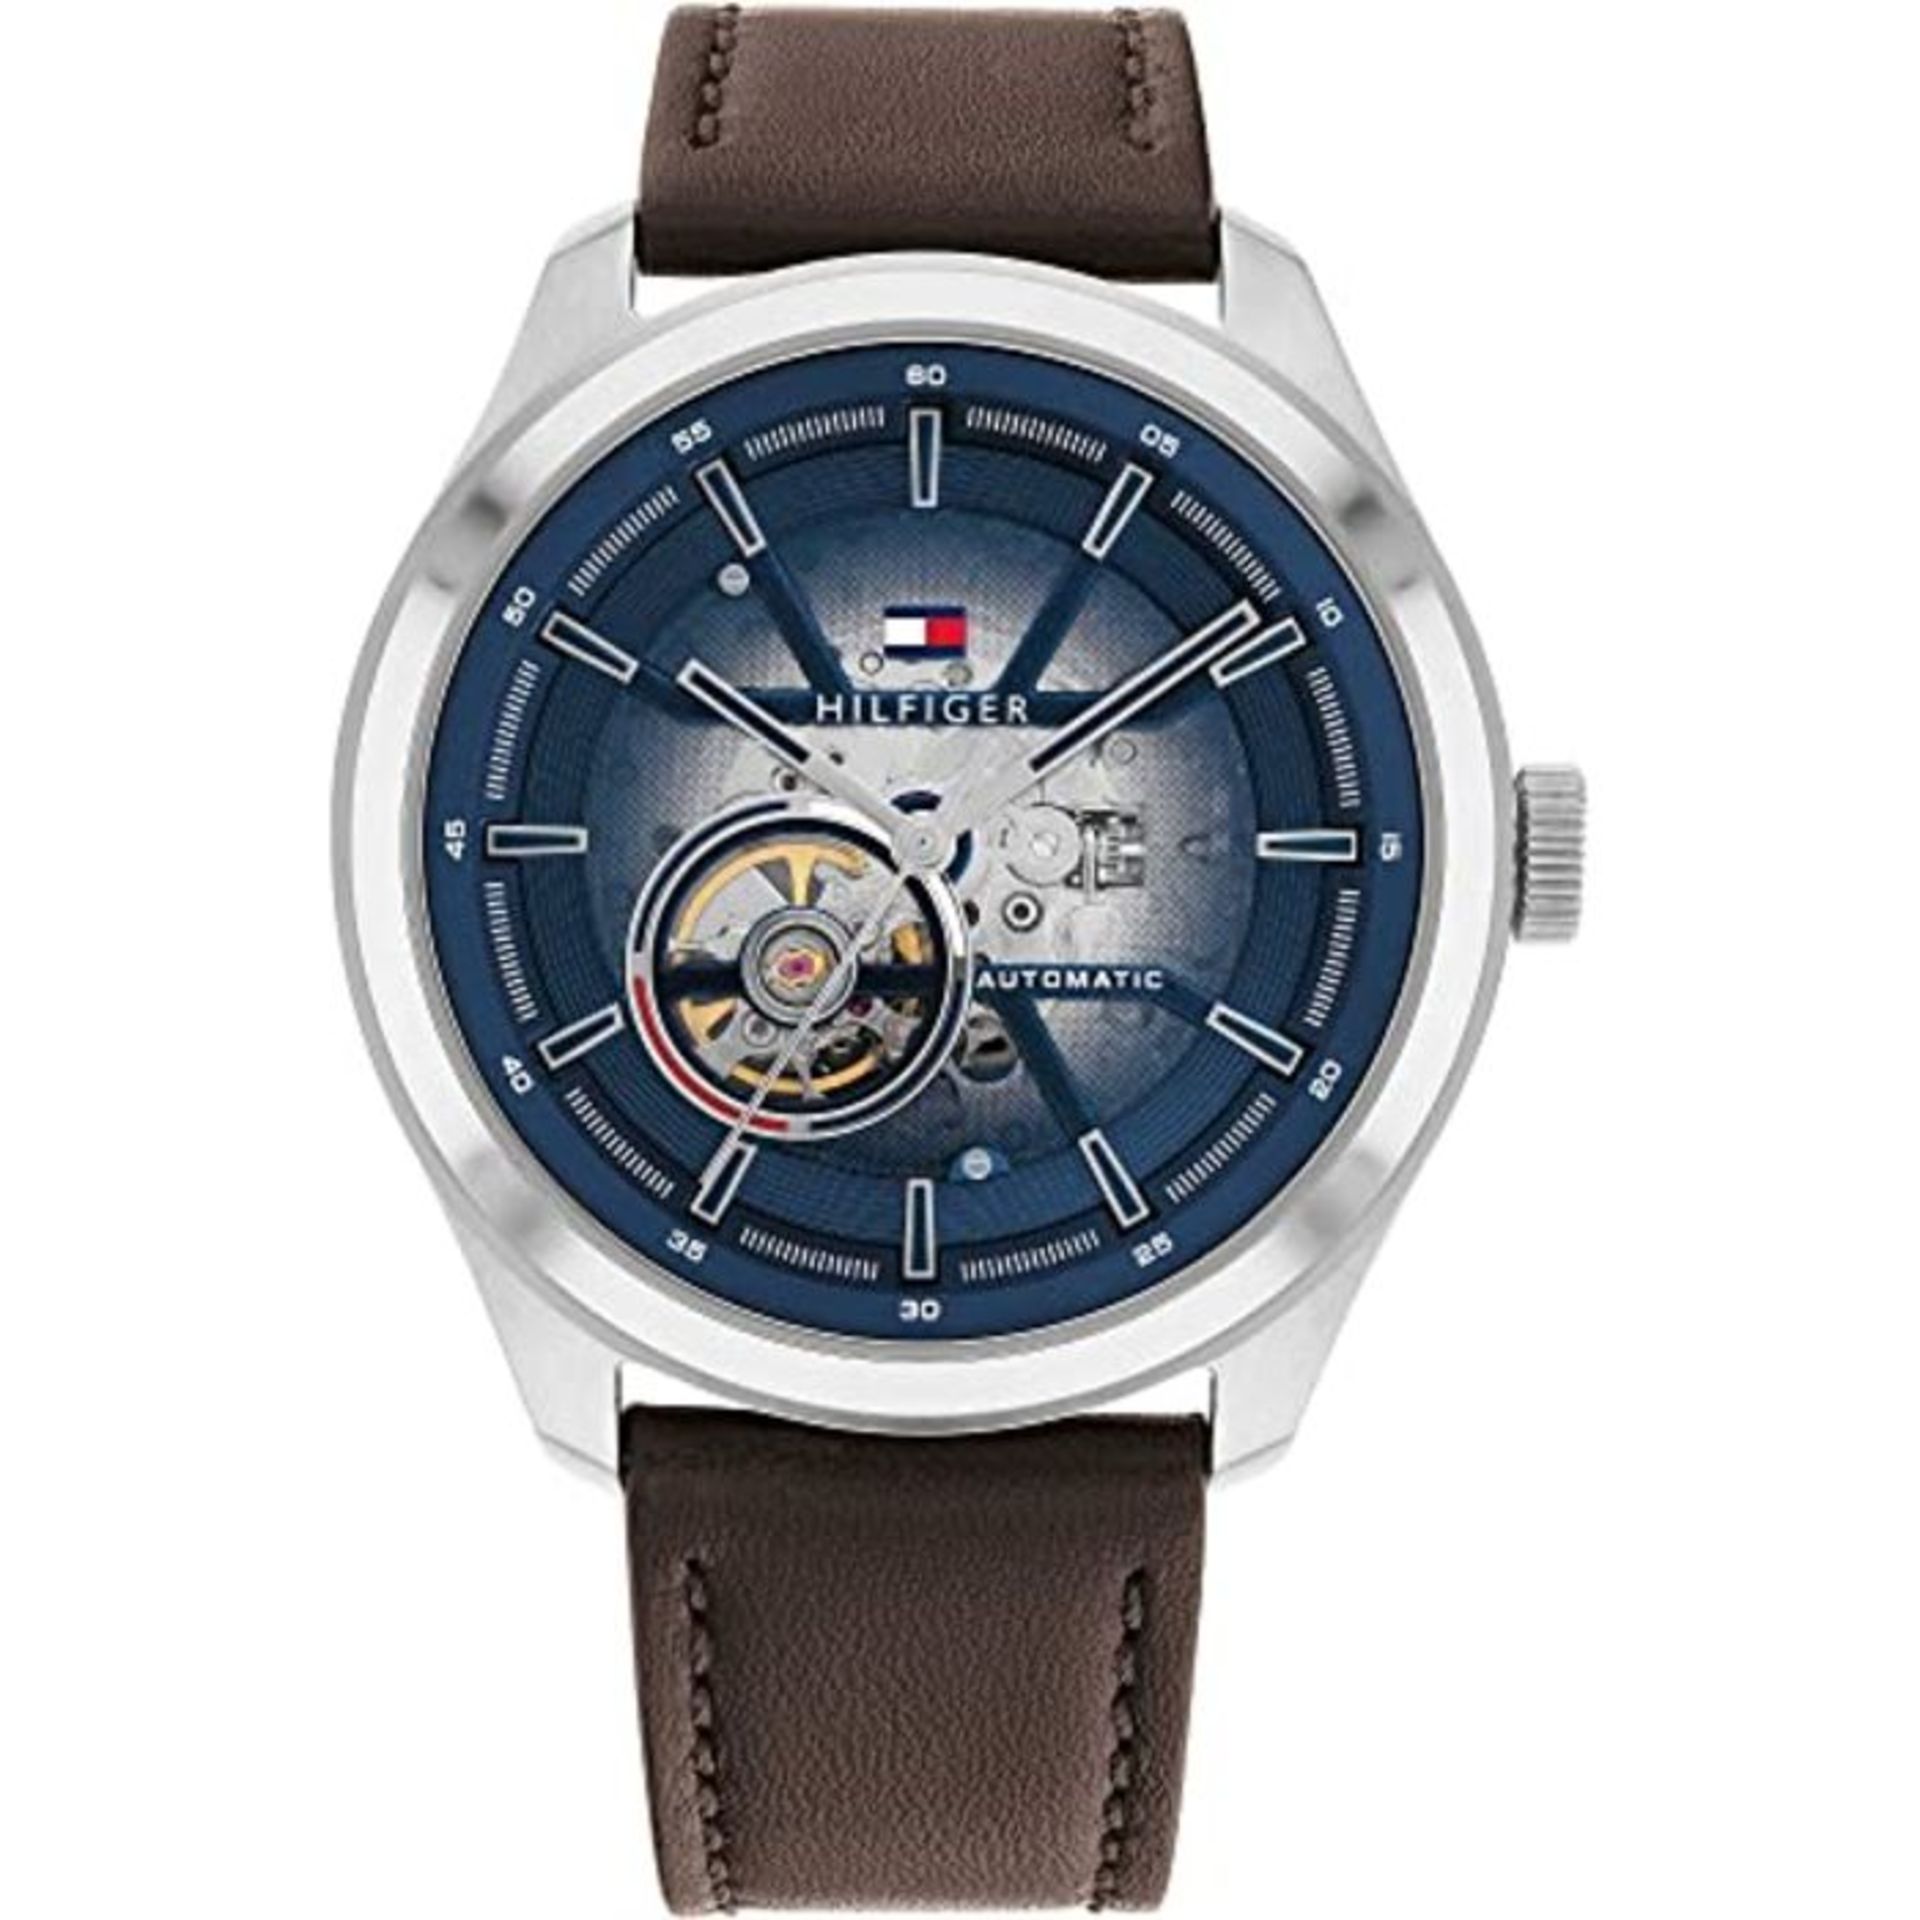 RRP £136.00 Tommy Hilfiger Men's Analog Quartz Watch with Leather Strap 1791888